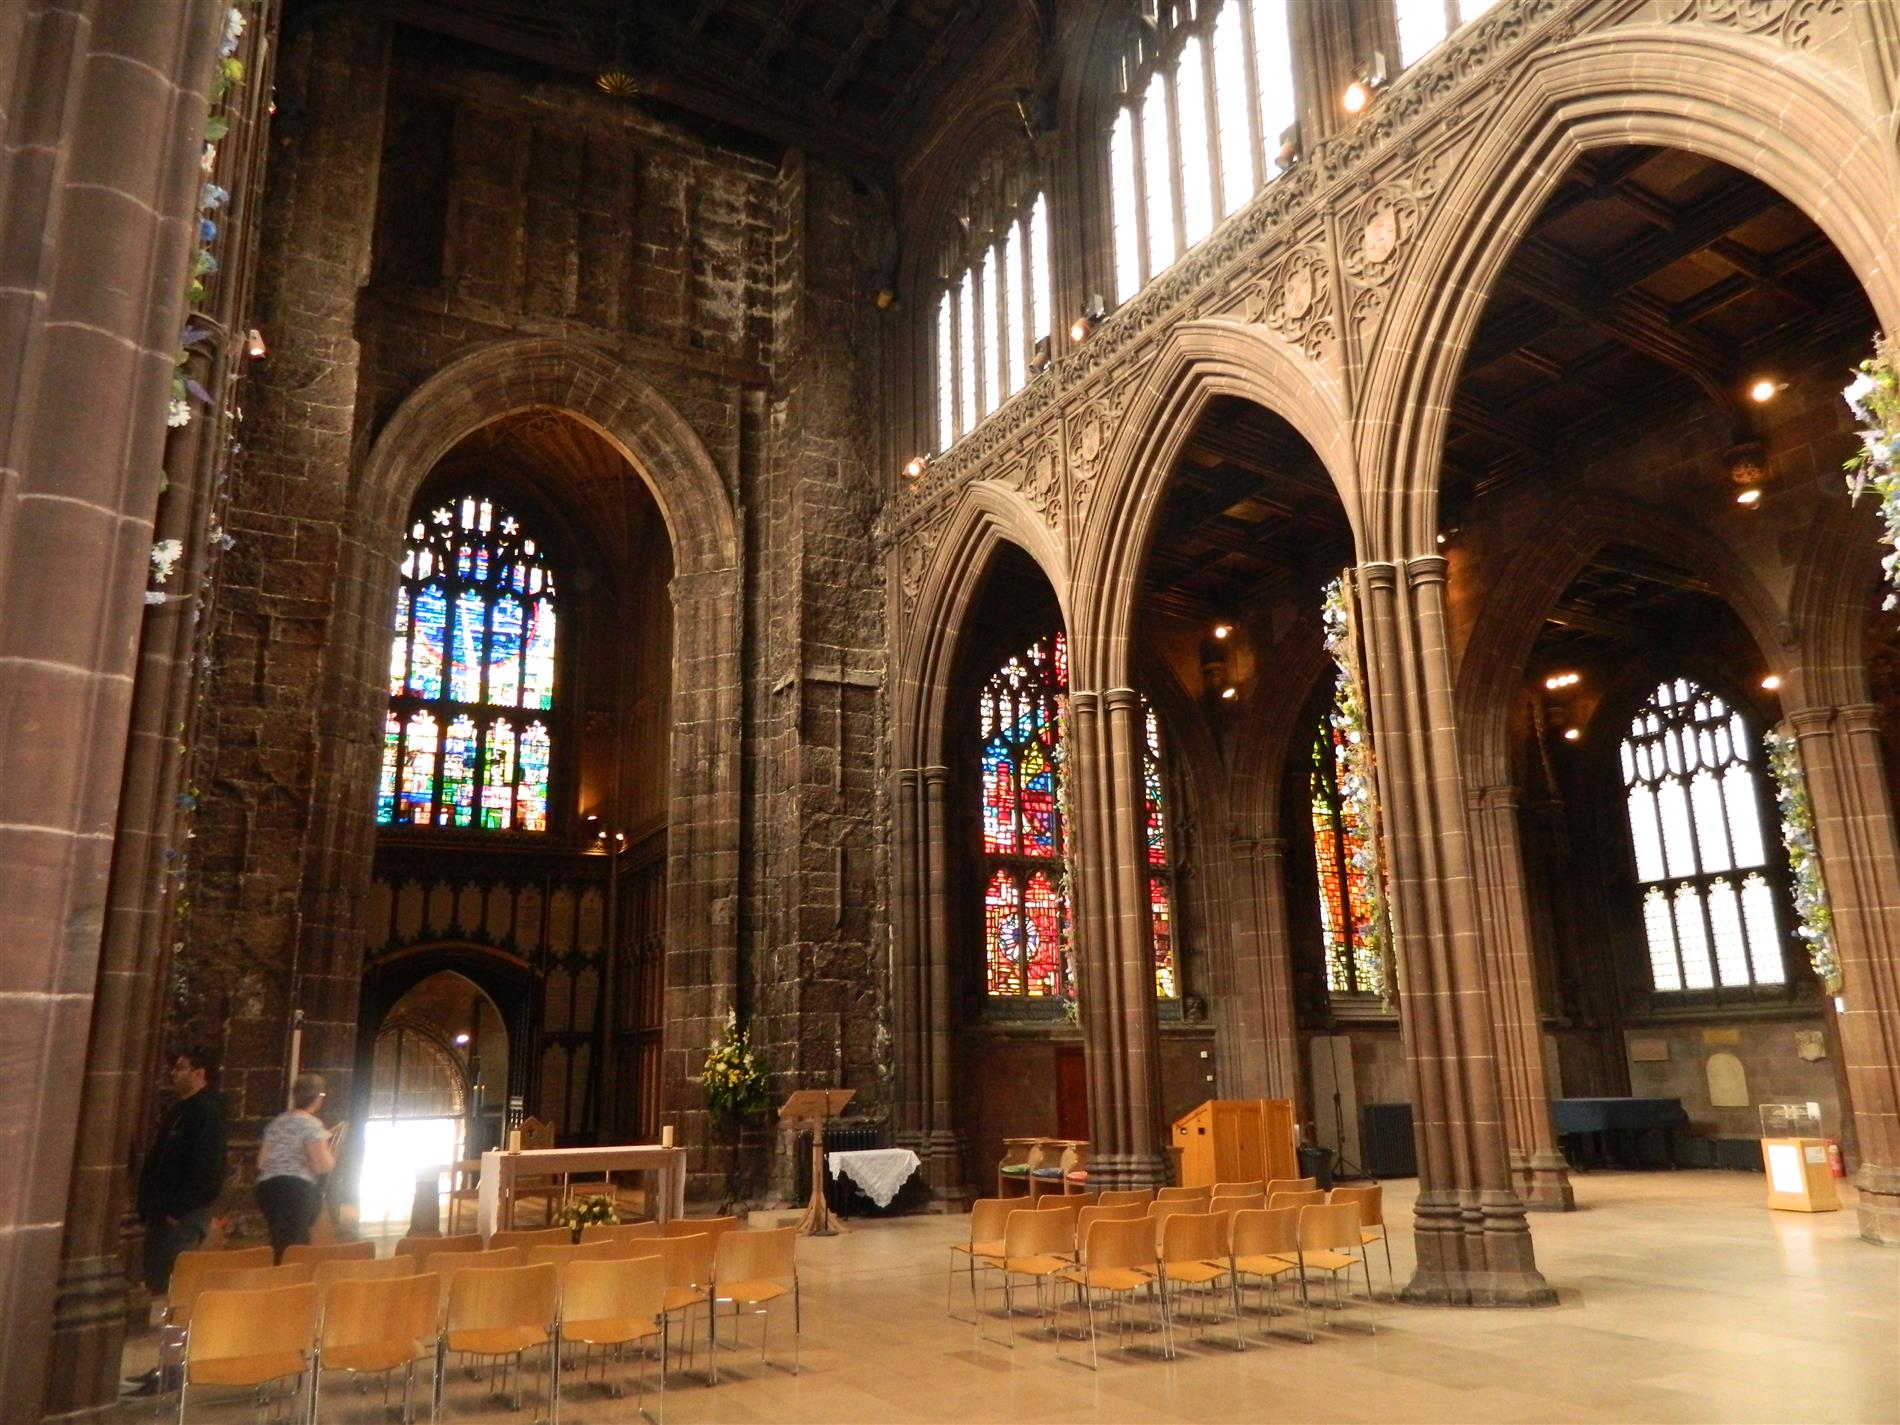 Sept18ManchesterCathedral4.JPG